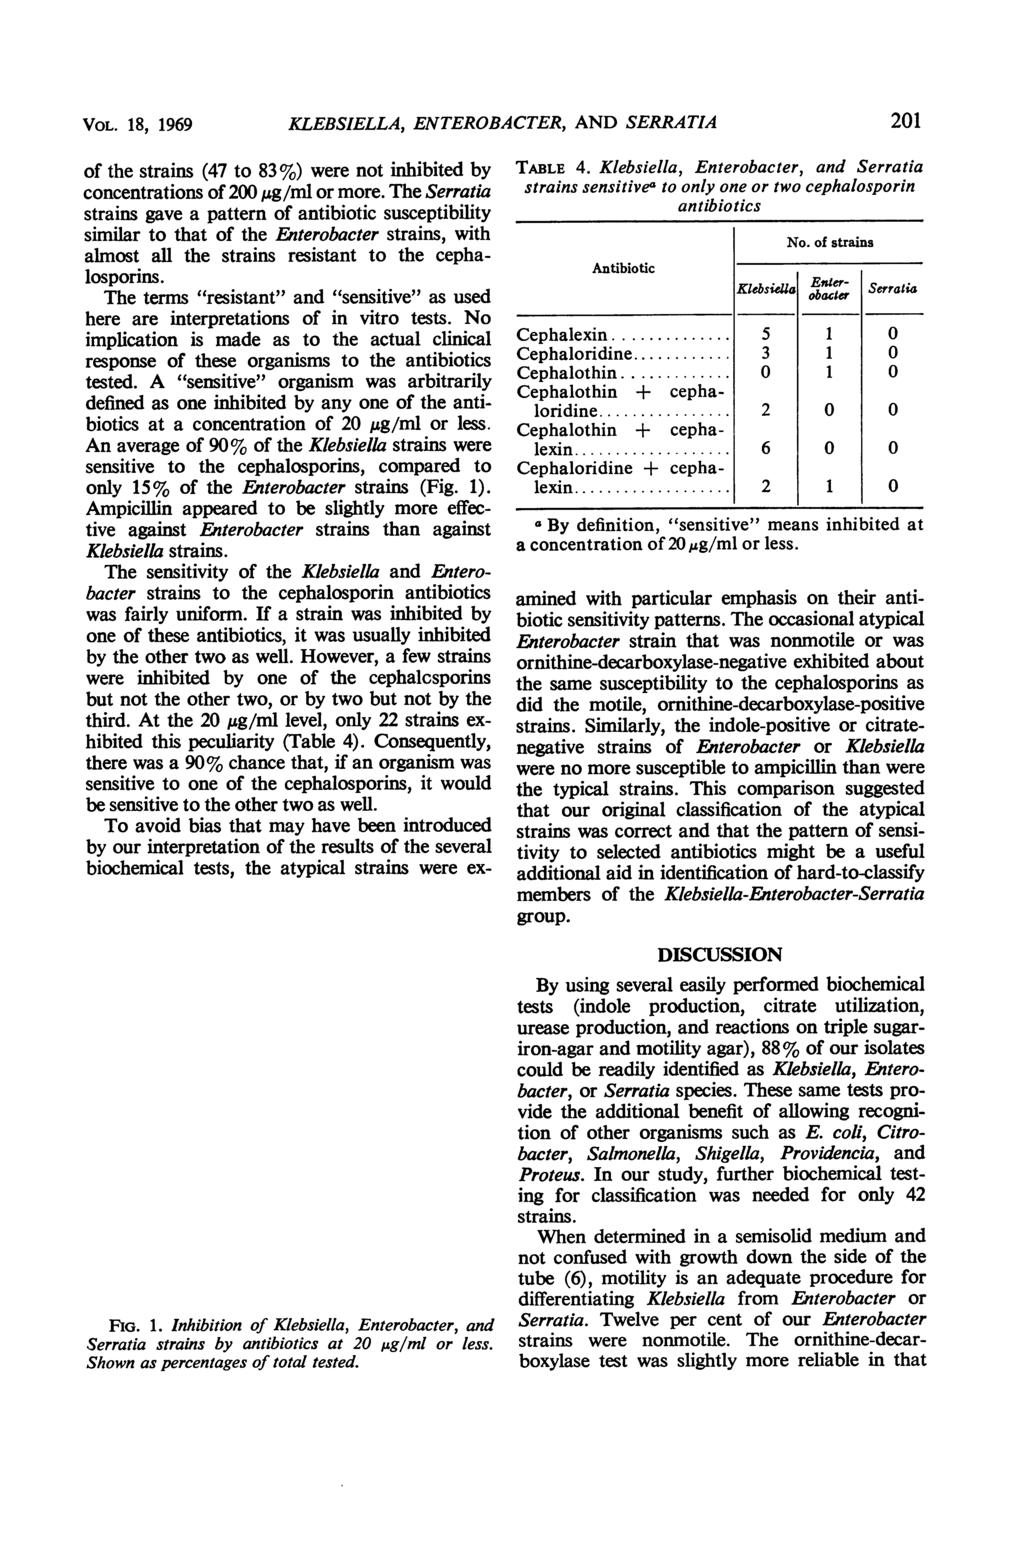 VOL. 18, 1969 KLEBSIELLA, ENTEROBACTER, AND SERRATIA of the strains (47 to 83 %) were not inhibited by concentrations of 200,ug/ml or more.